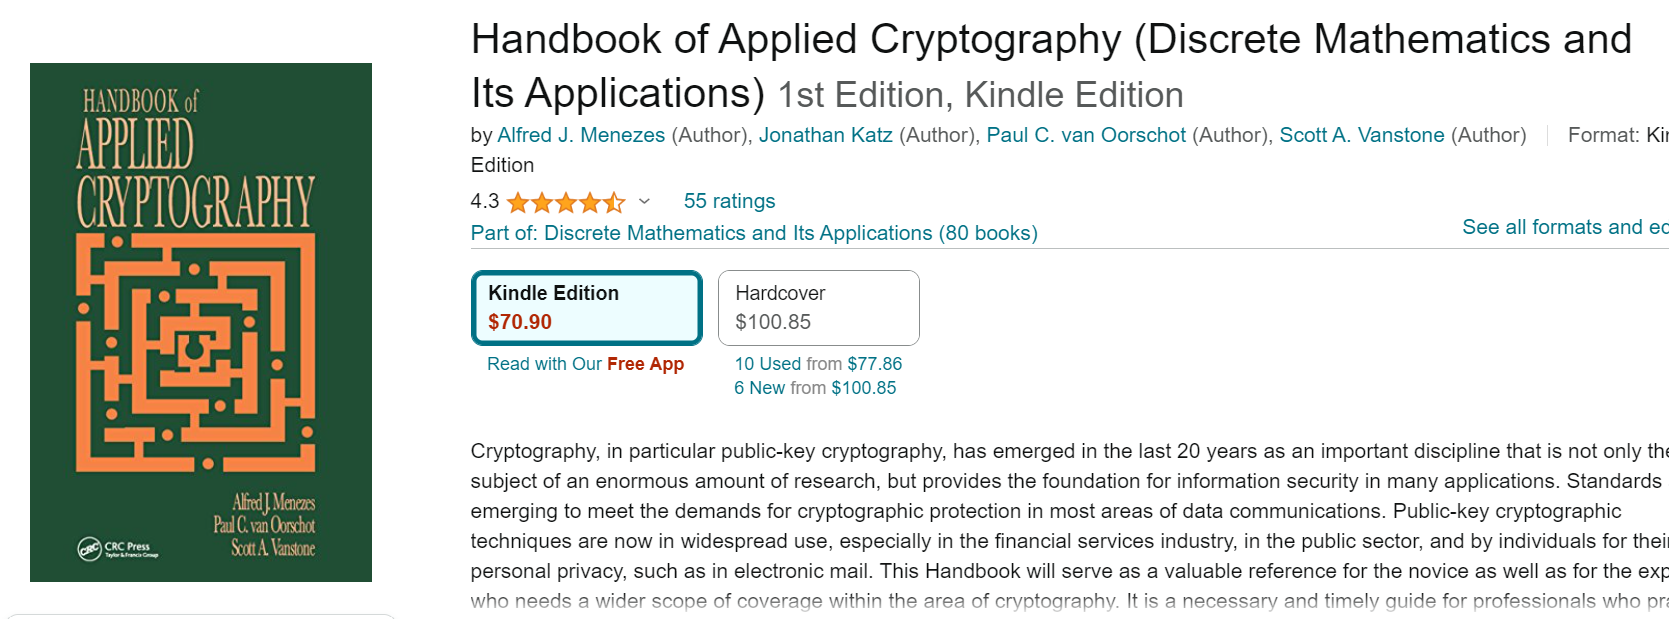 Real book is called &ldquo;Handbook of Applied Cryptography&rdquo;